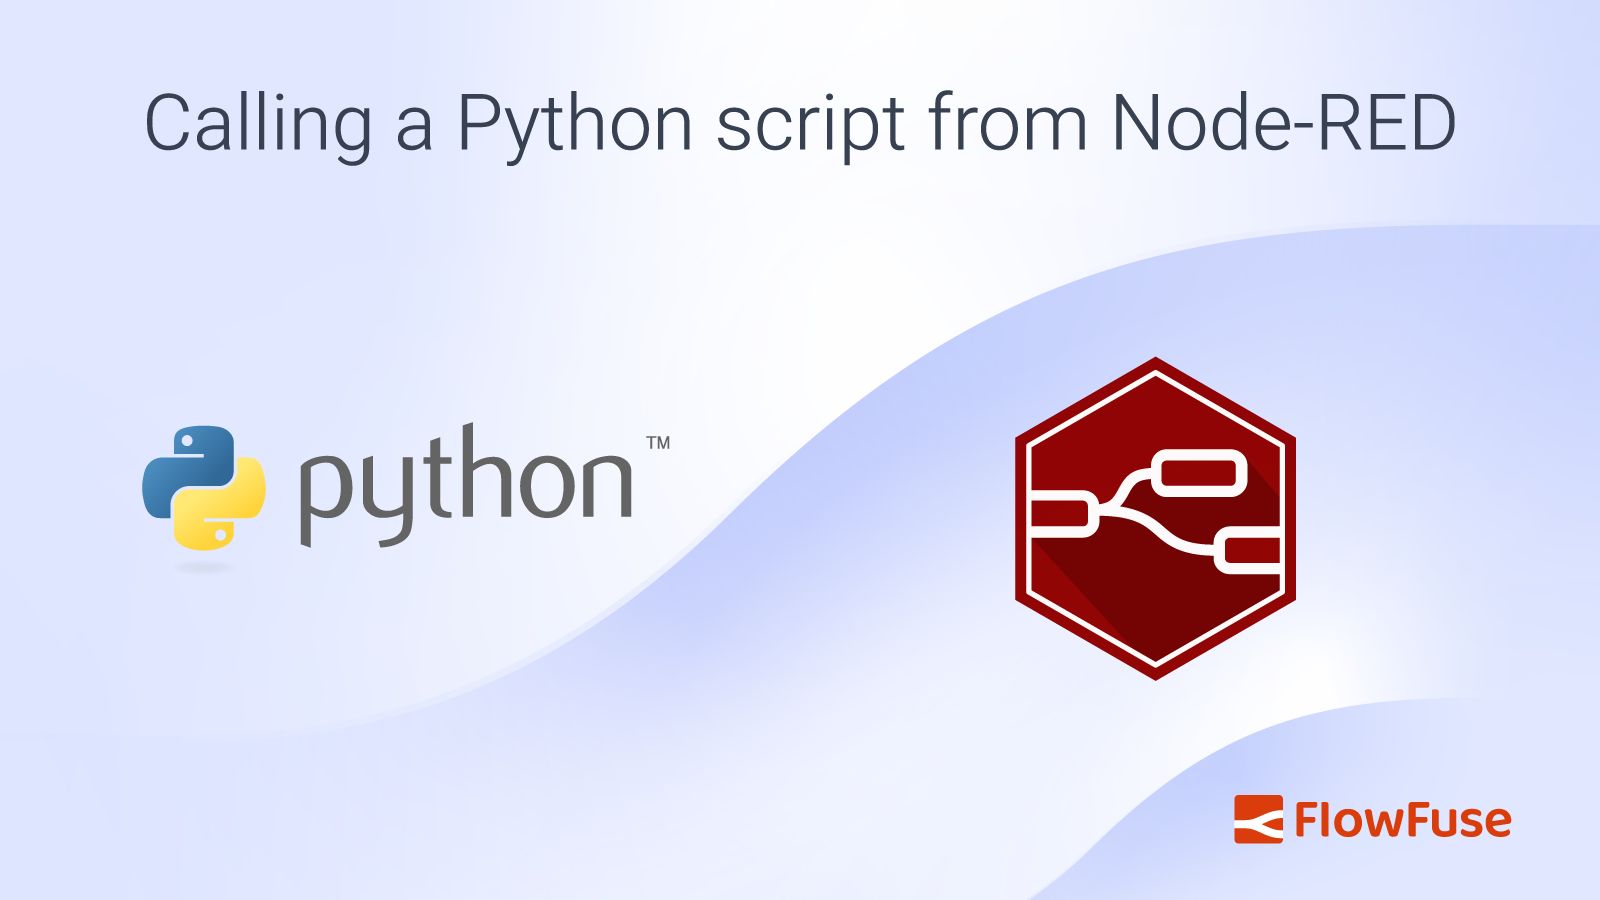 Image representing Calling a Python script from Node-RED